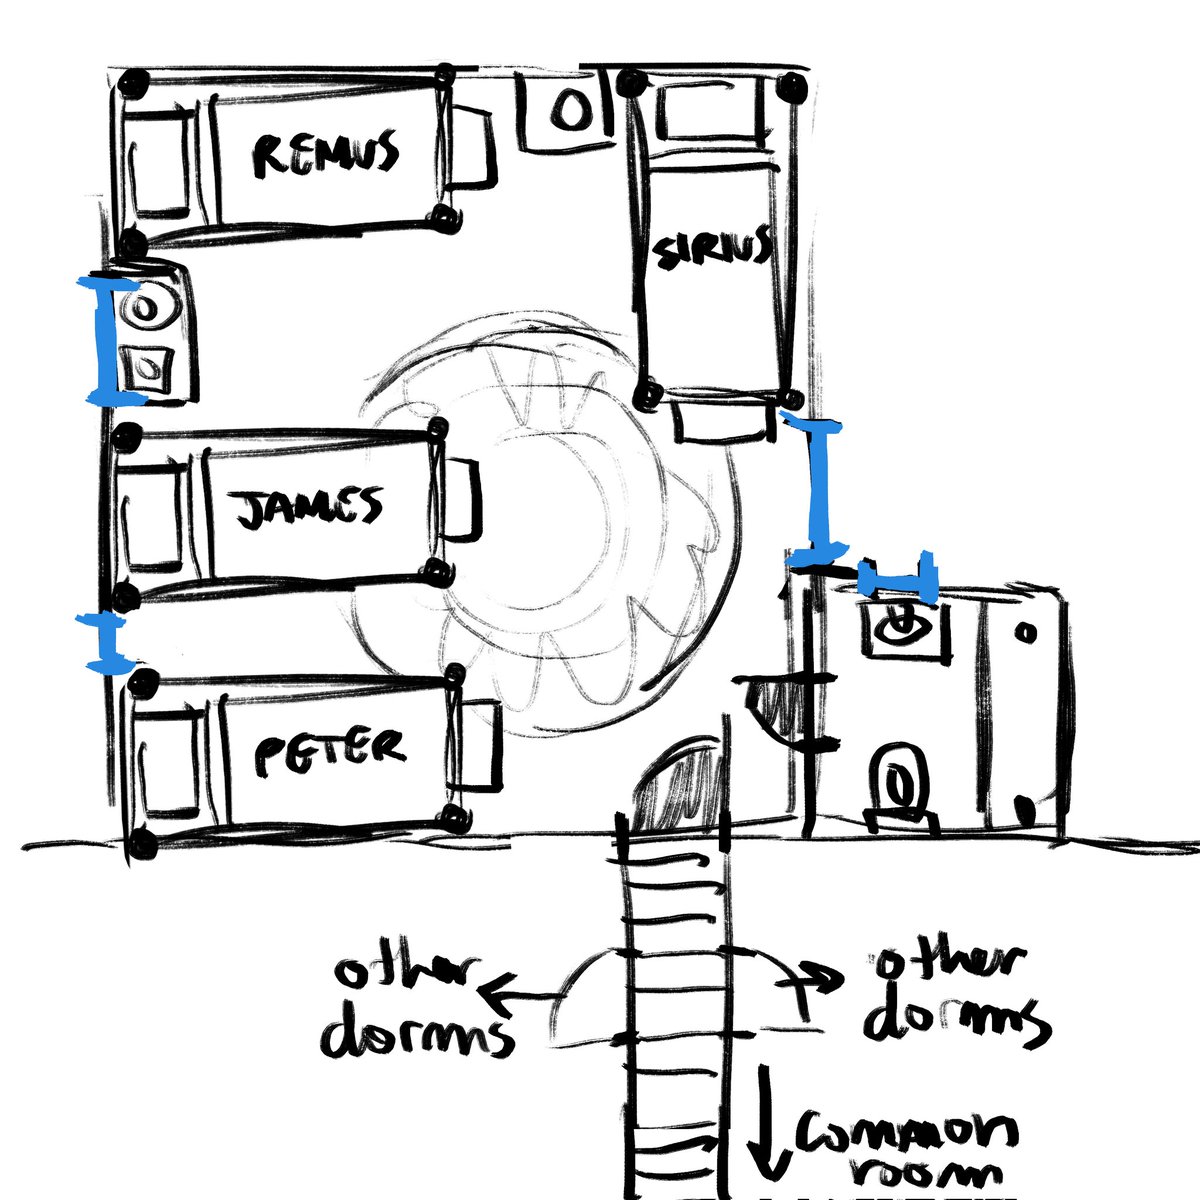 i realized the way i imagine the gryffindor common room + the marauder's dorm is completely made up so i drew the way i see the floorplan (blue lines are windows)